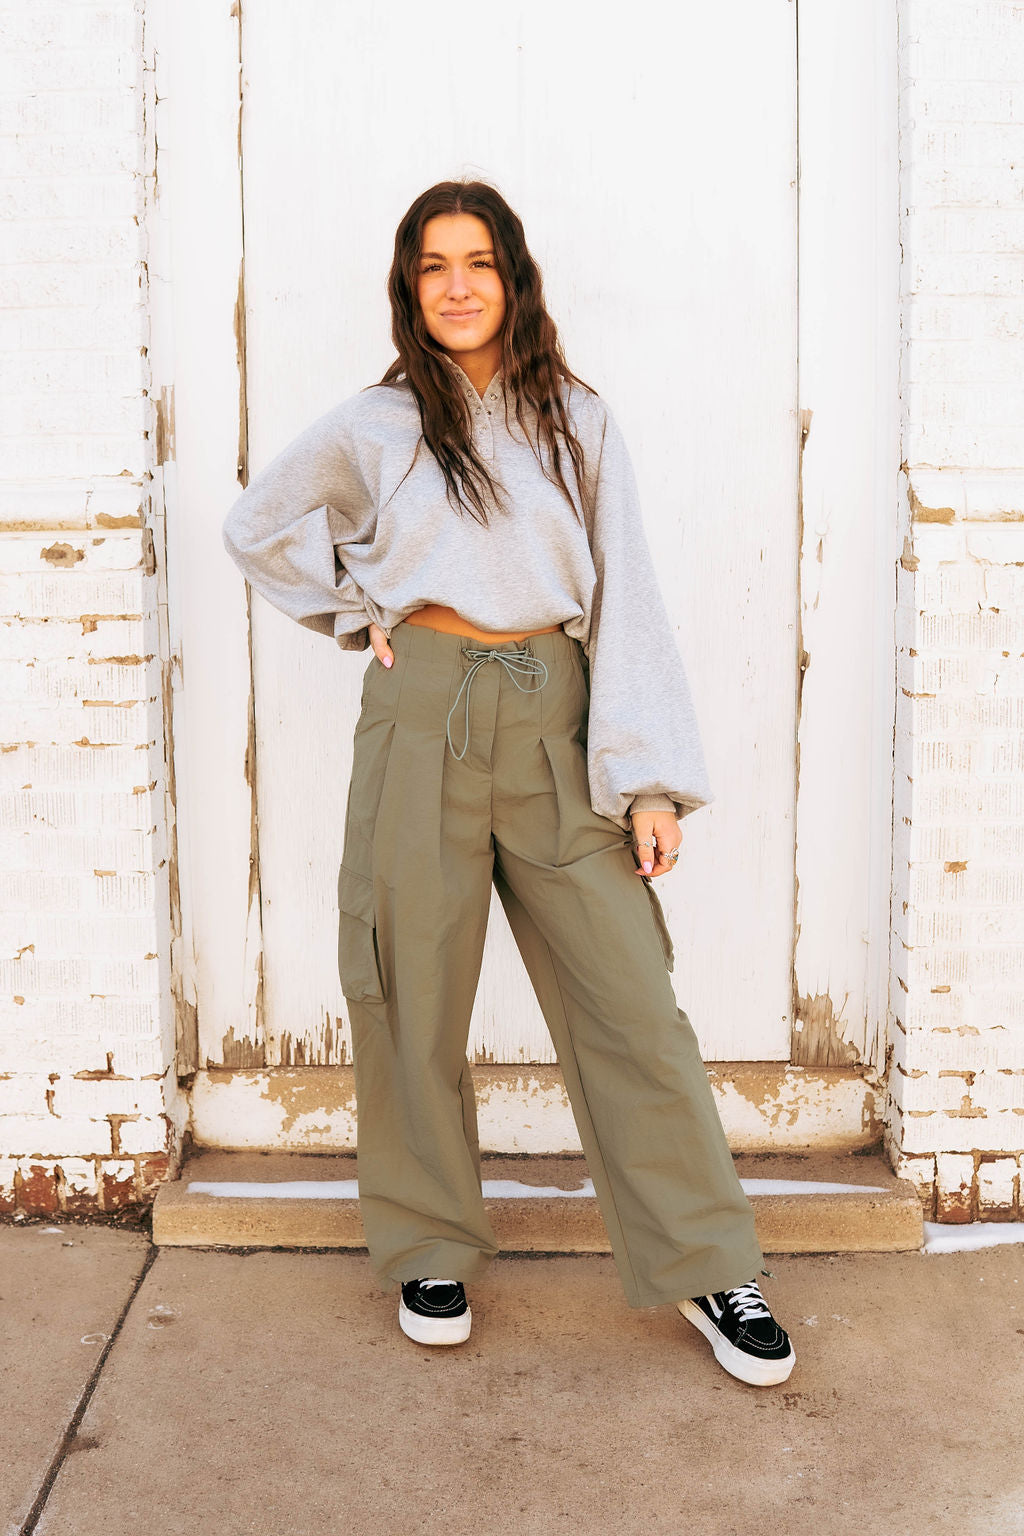 These pants are super comfortable and durable. They look very trendy and can go anywhere! The light olive color makes them versatile and so much fun!